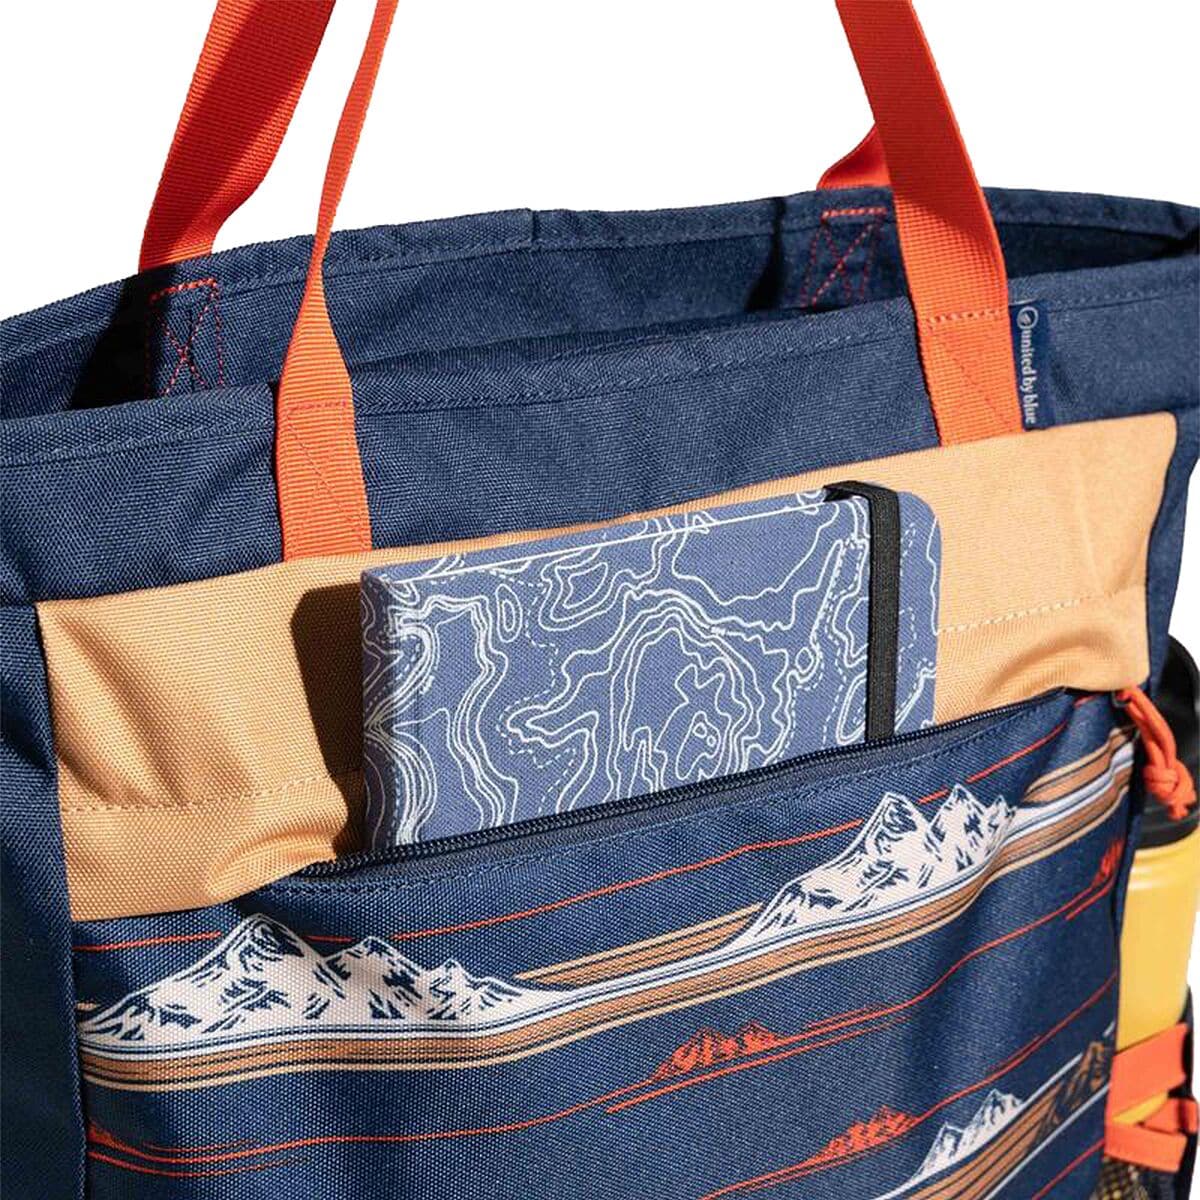 Large Tote Convertible Bag Navy Blue - Fortunata Patchwork